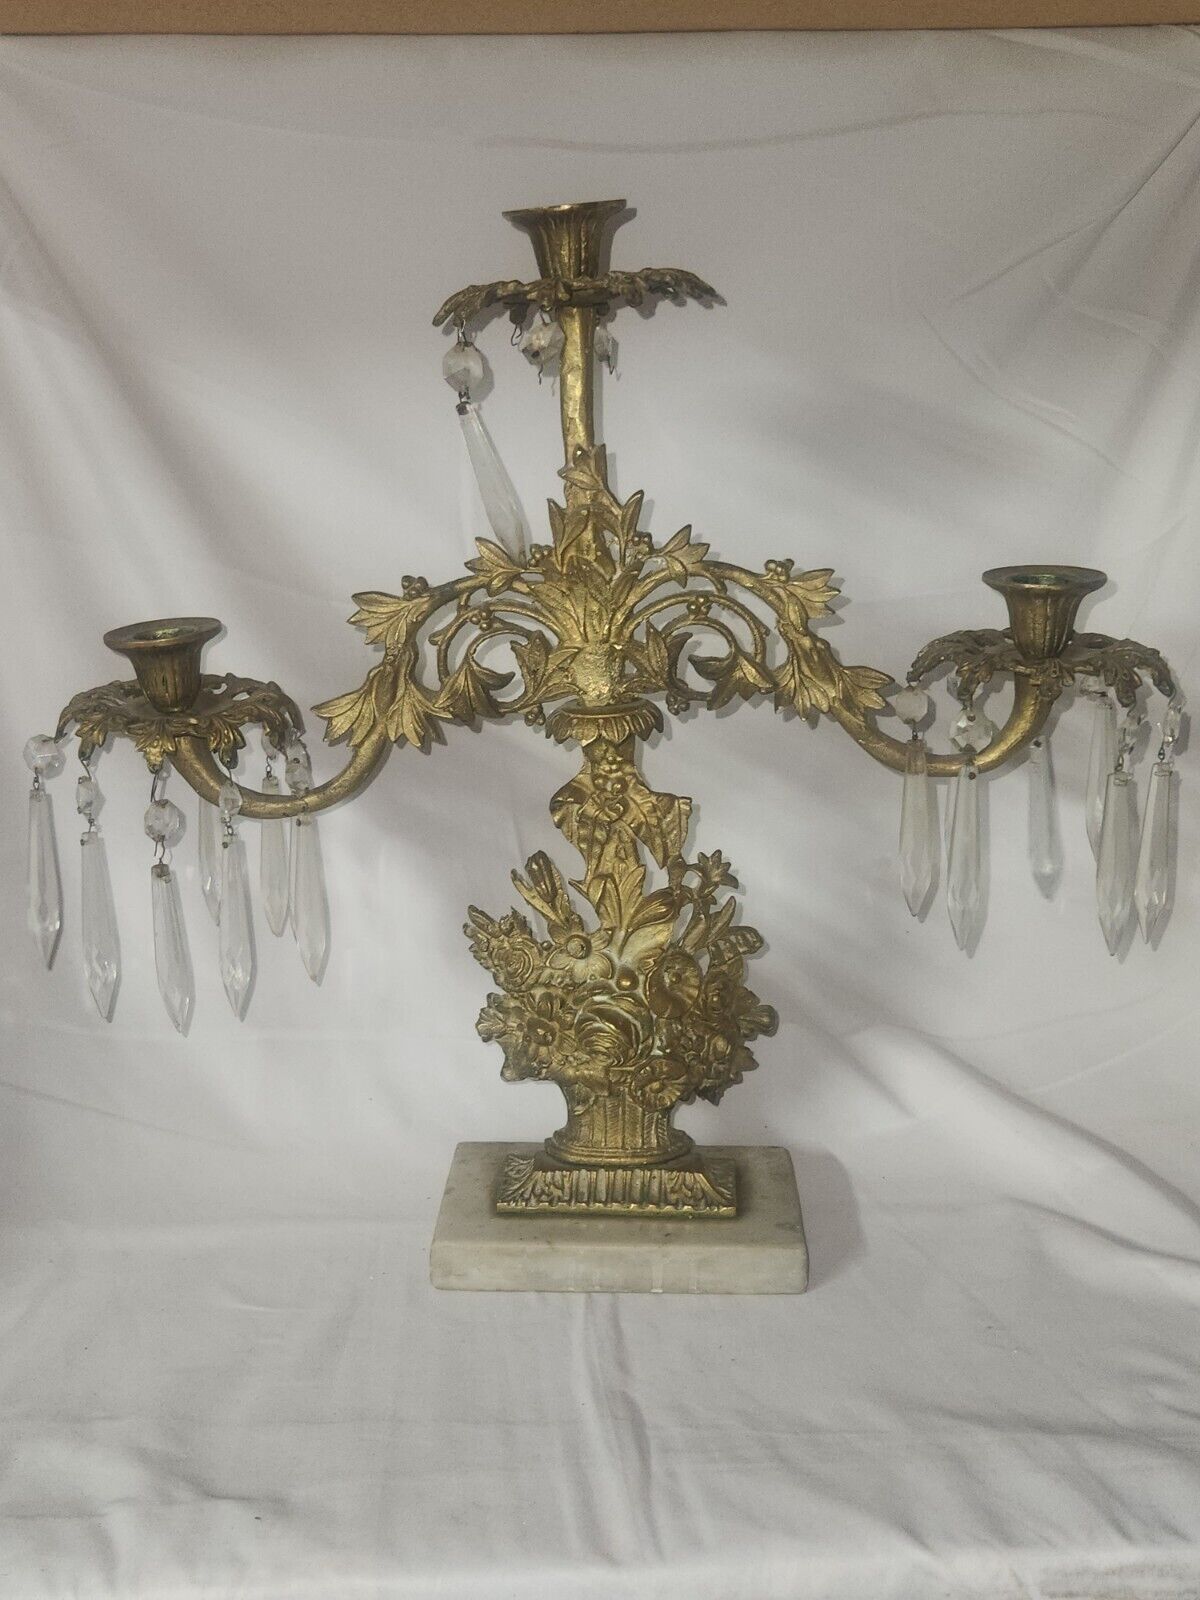 Antique Ornate Solid Brass Candelabra with Floral Bouquet Design on Marble Base